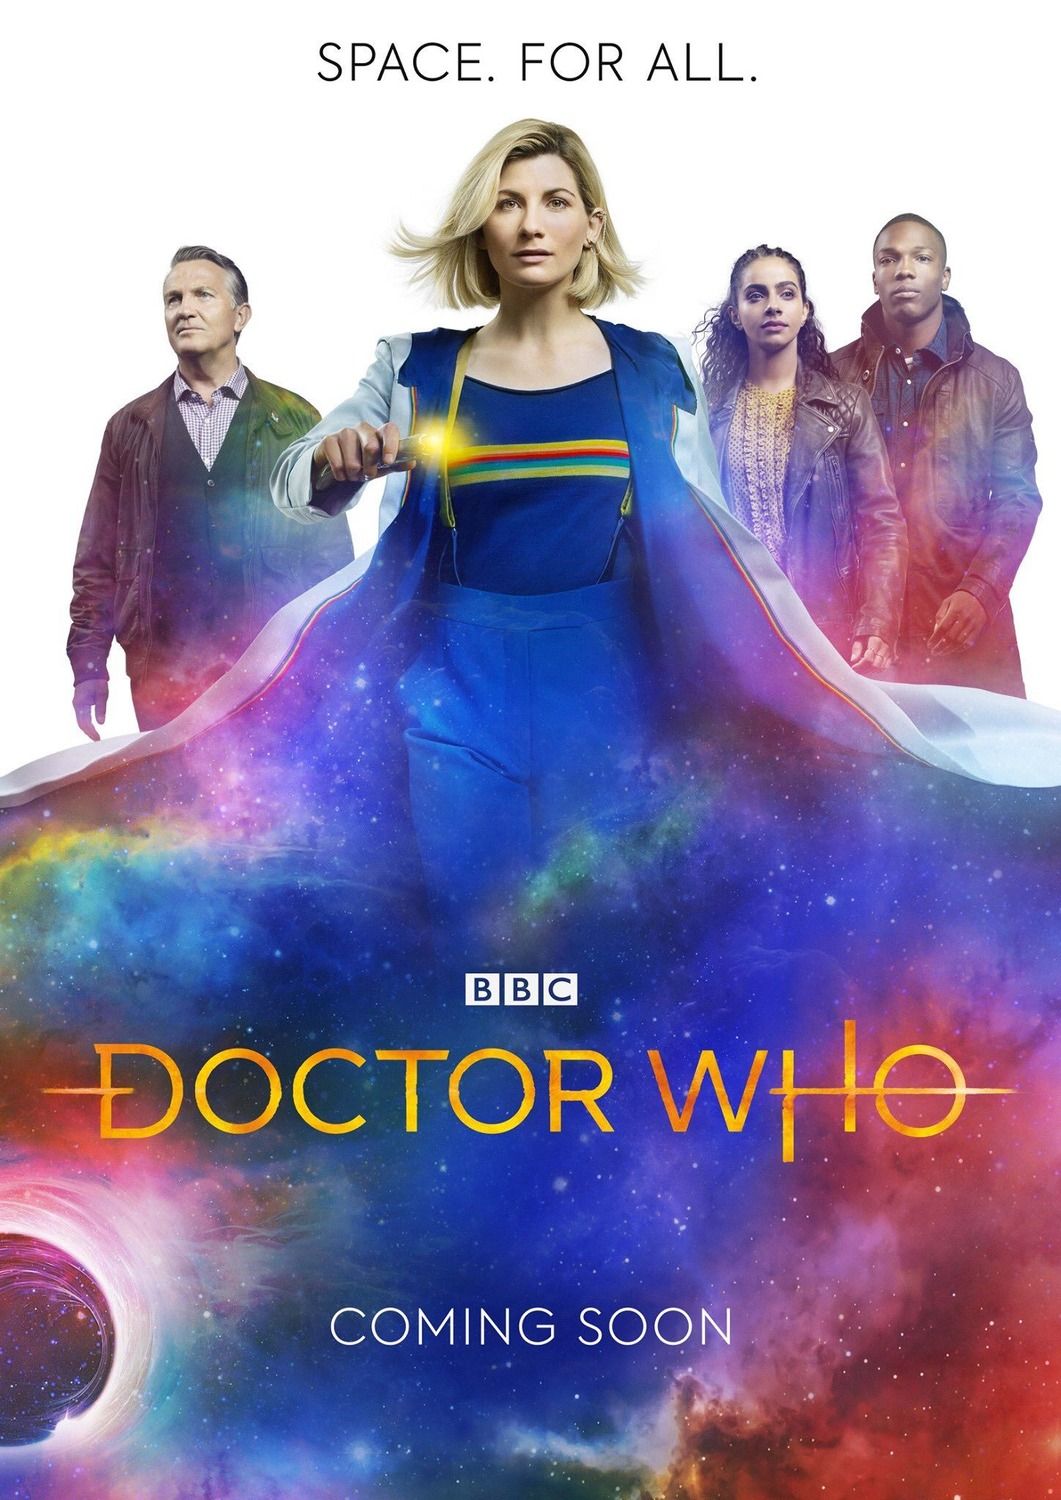 Doctor Who 2005 Poster